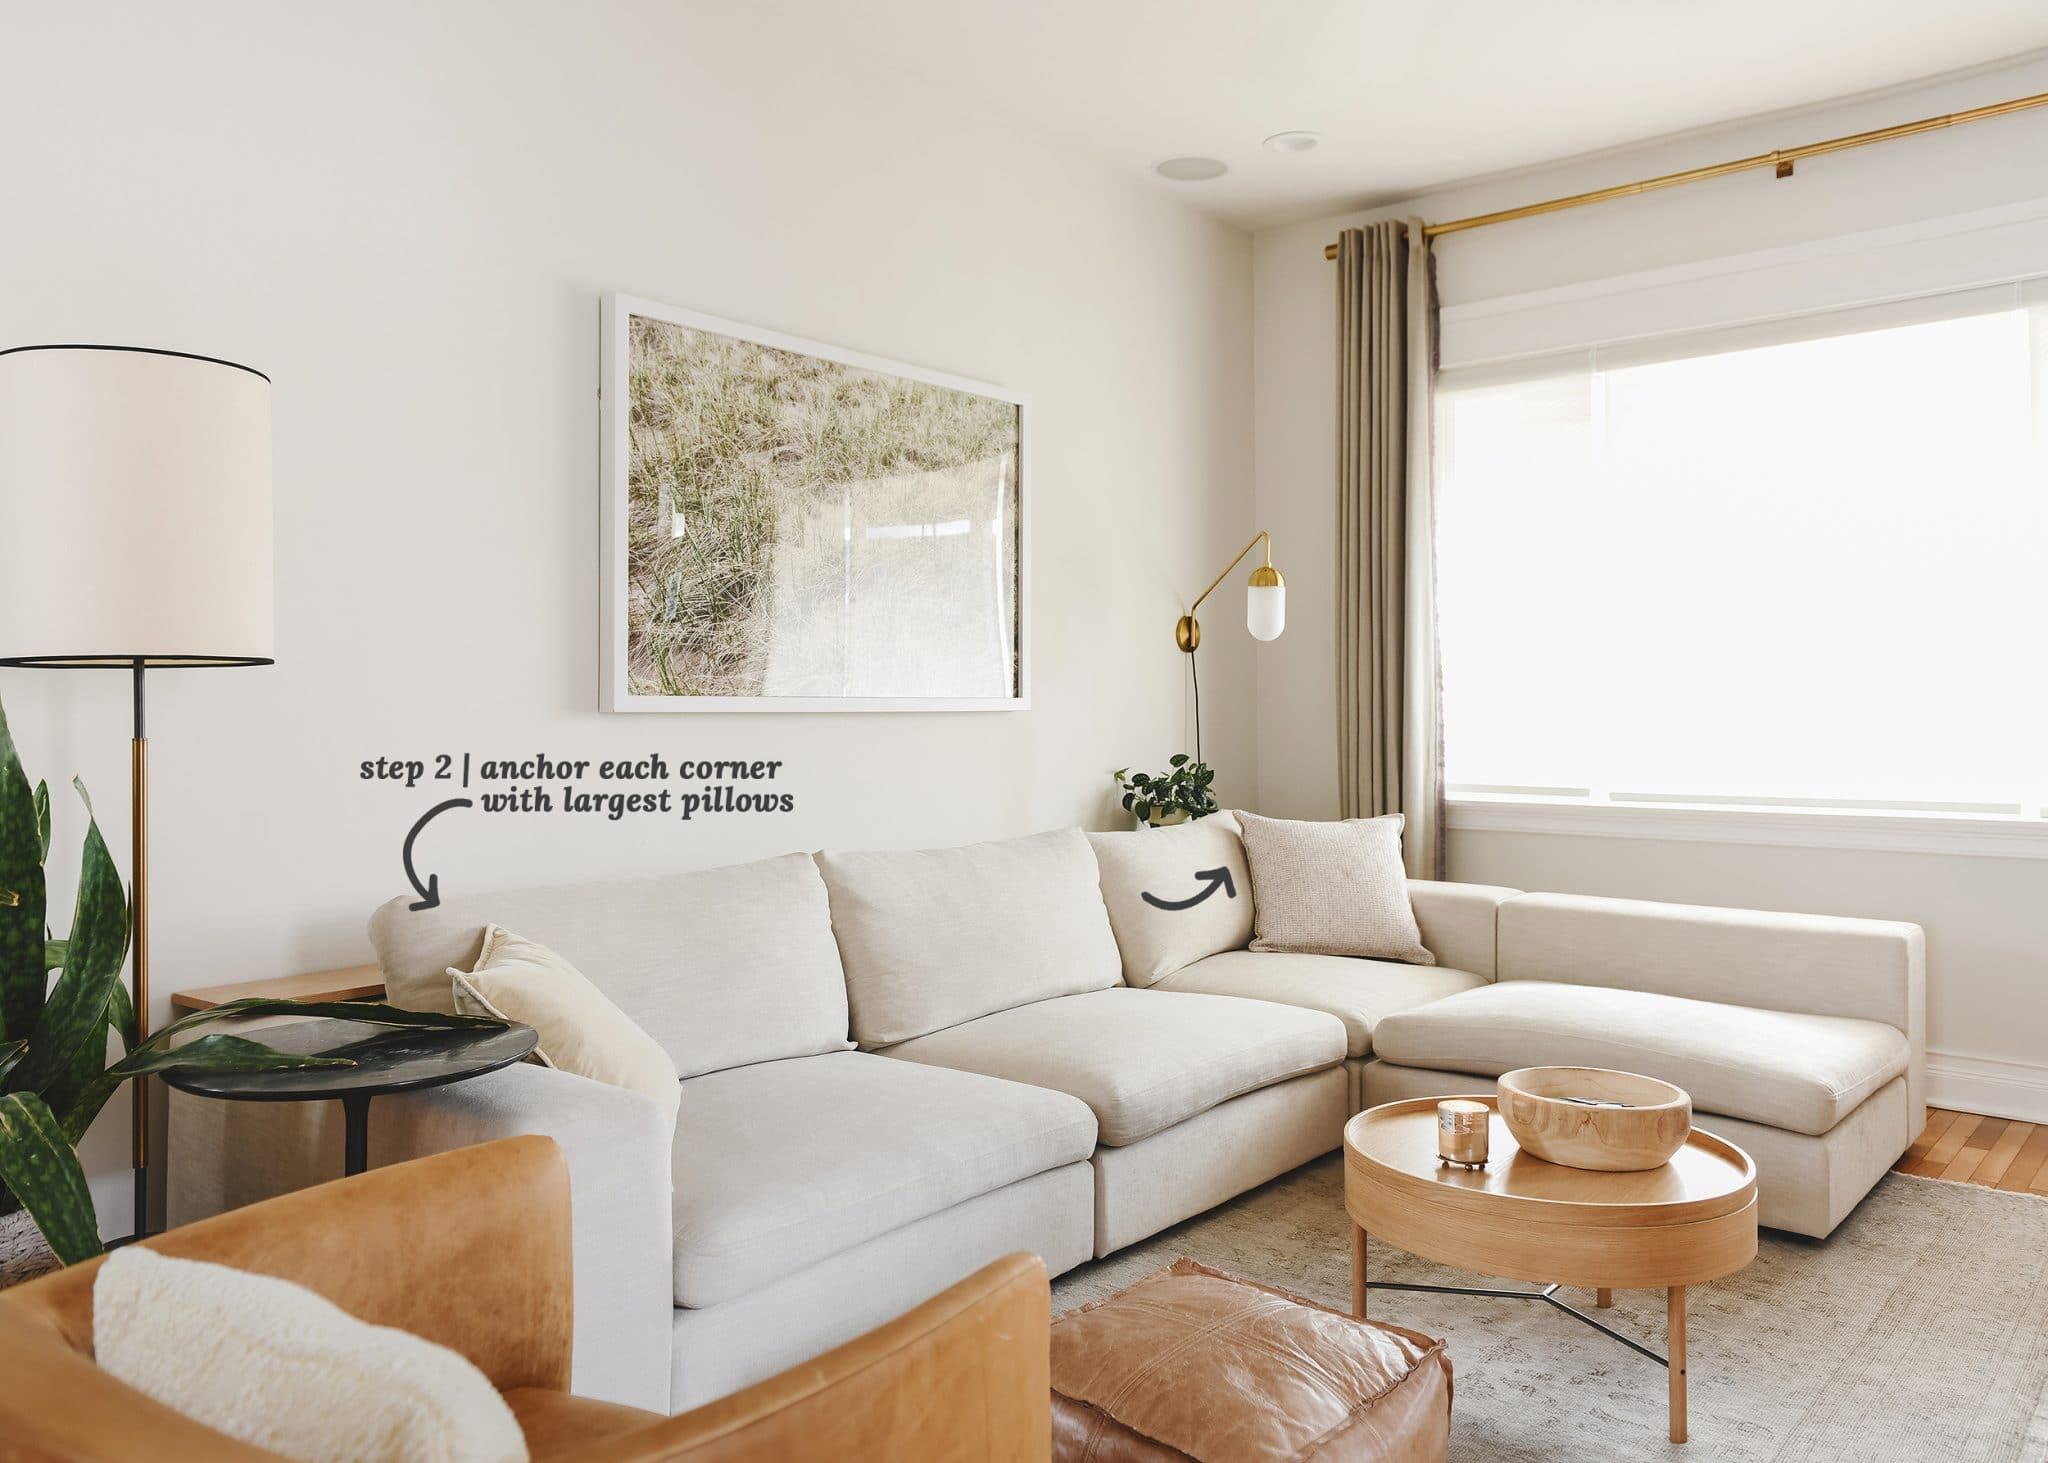 I'm sharing my simple, inviting formula for styling pillows on an L-shaped or U-shaped sofa, via Yellow Brick Home